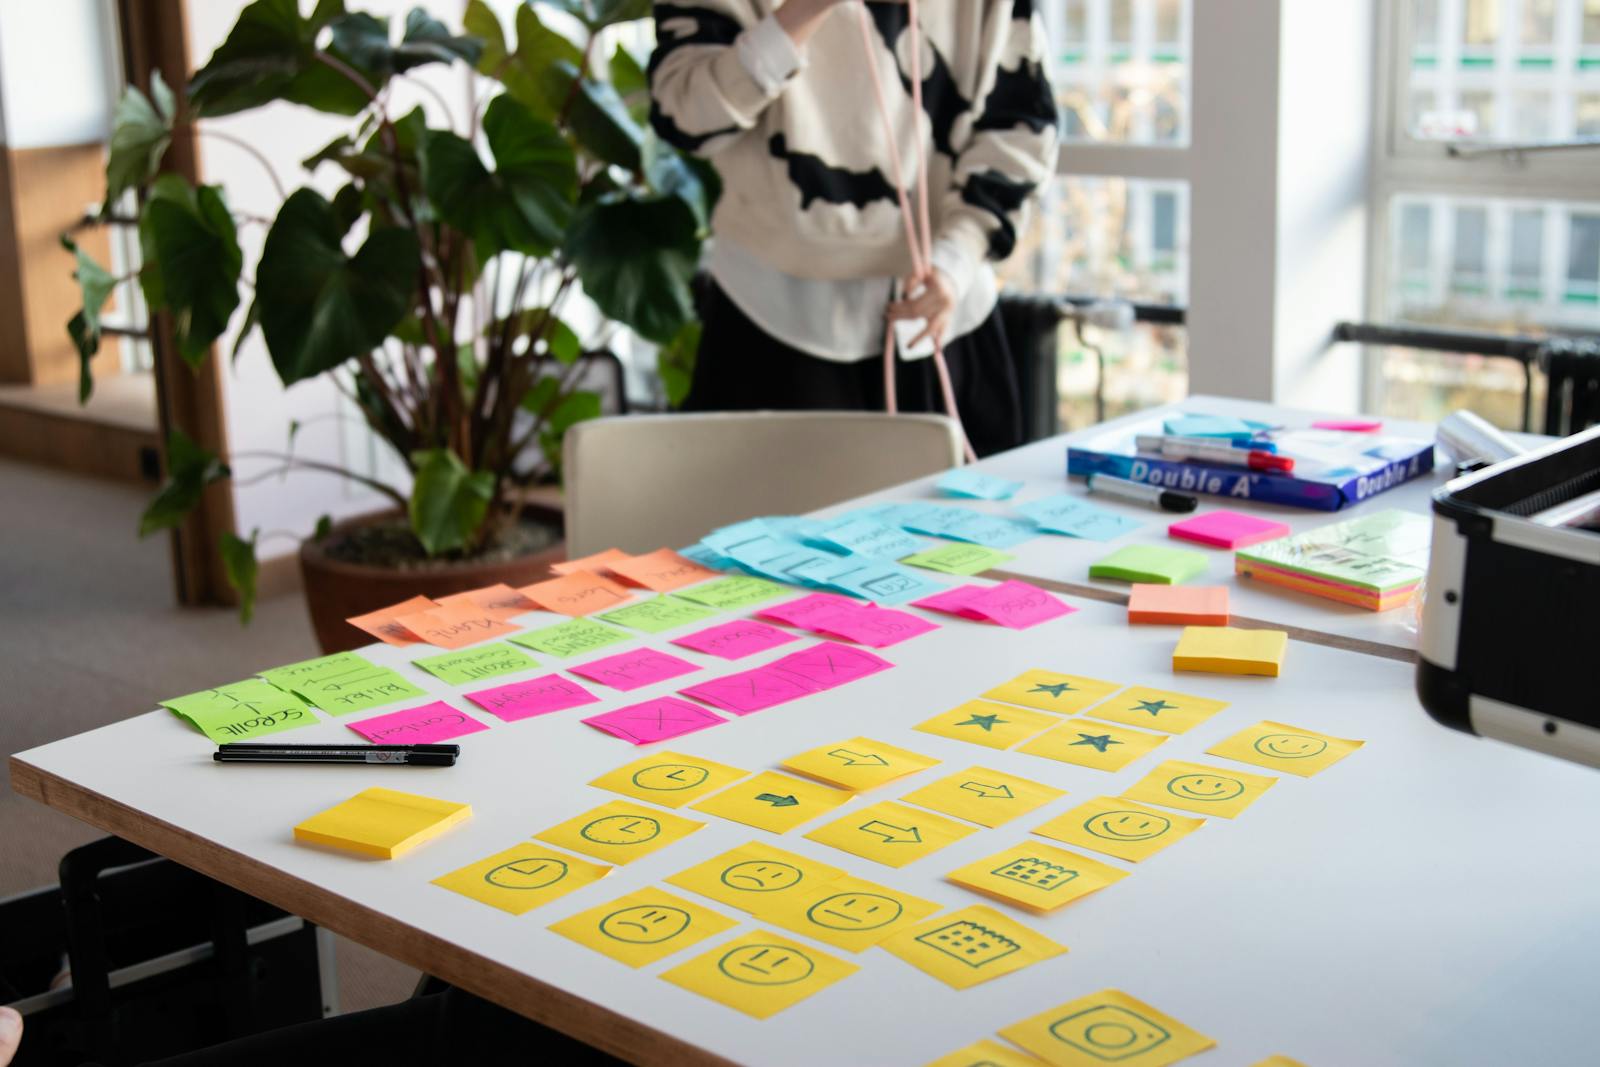 A creative brainstorming session with colorful sticky notes and icons on a whiteboard, showcasing creating a content strategy in digital marketing.